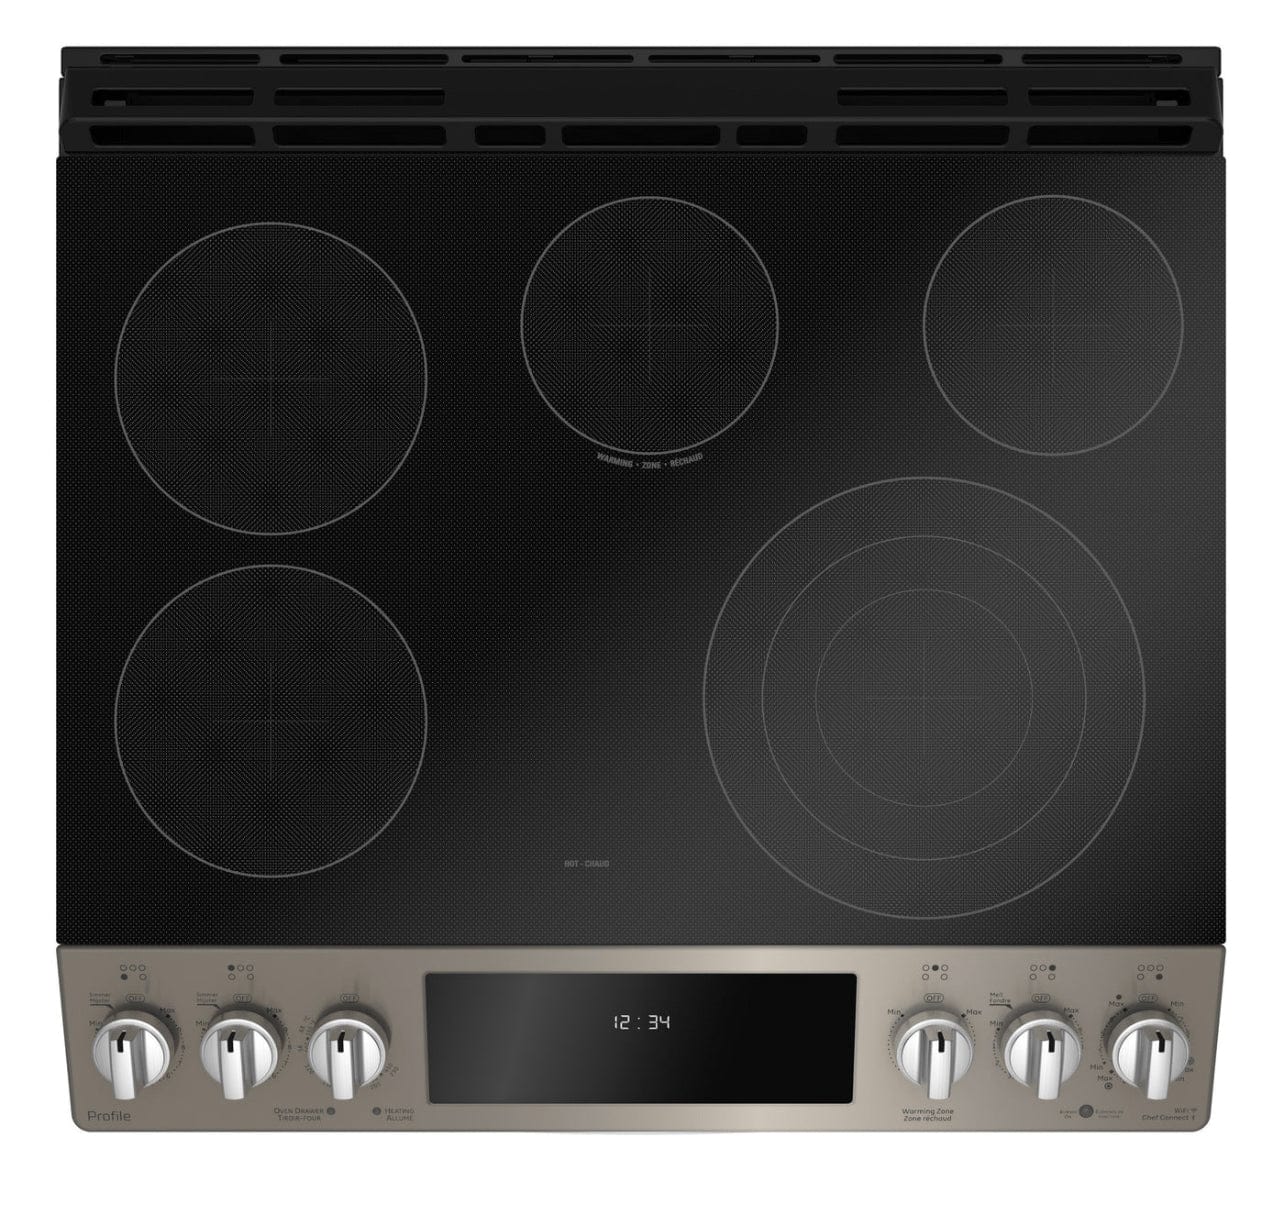 GE Profile PCS940EMES / pchs920miss Range, 30" Electric Range, Self Clean, Glass Burners (Electric), Convection, 5 Burners, 6.3 cu. ft. Capacity, Oven Drawer, Air Fry, 1 Ovens, Wifi Enabled, 3000W, Front Controls, Slate colour True European Convection